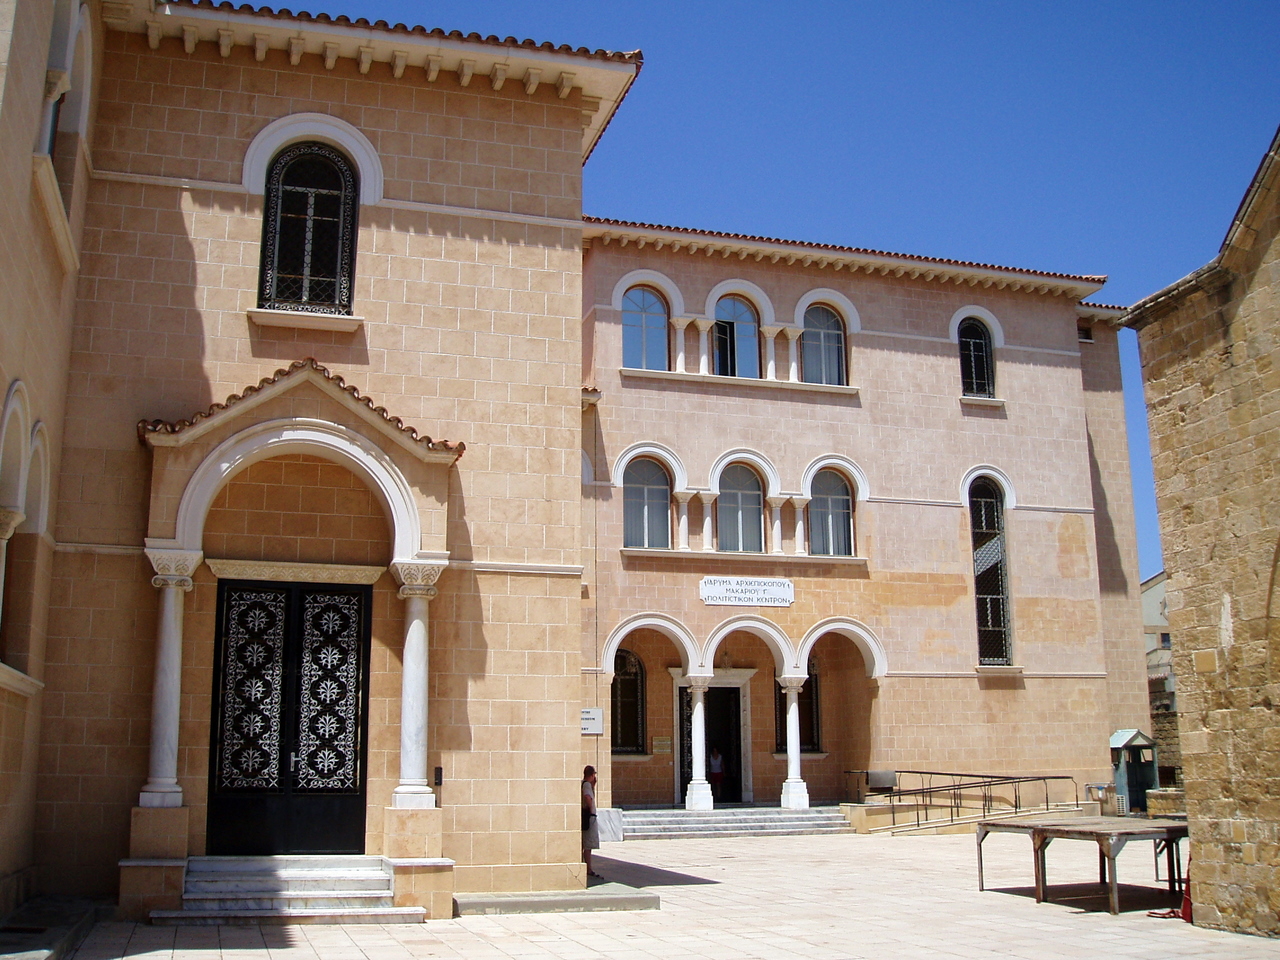 Archbishop Makarios' Palace in Nicosia - now called the Byzantine Museum